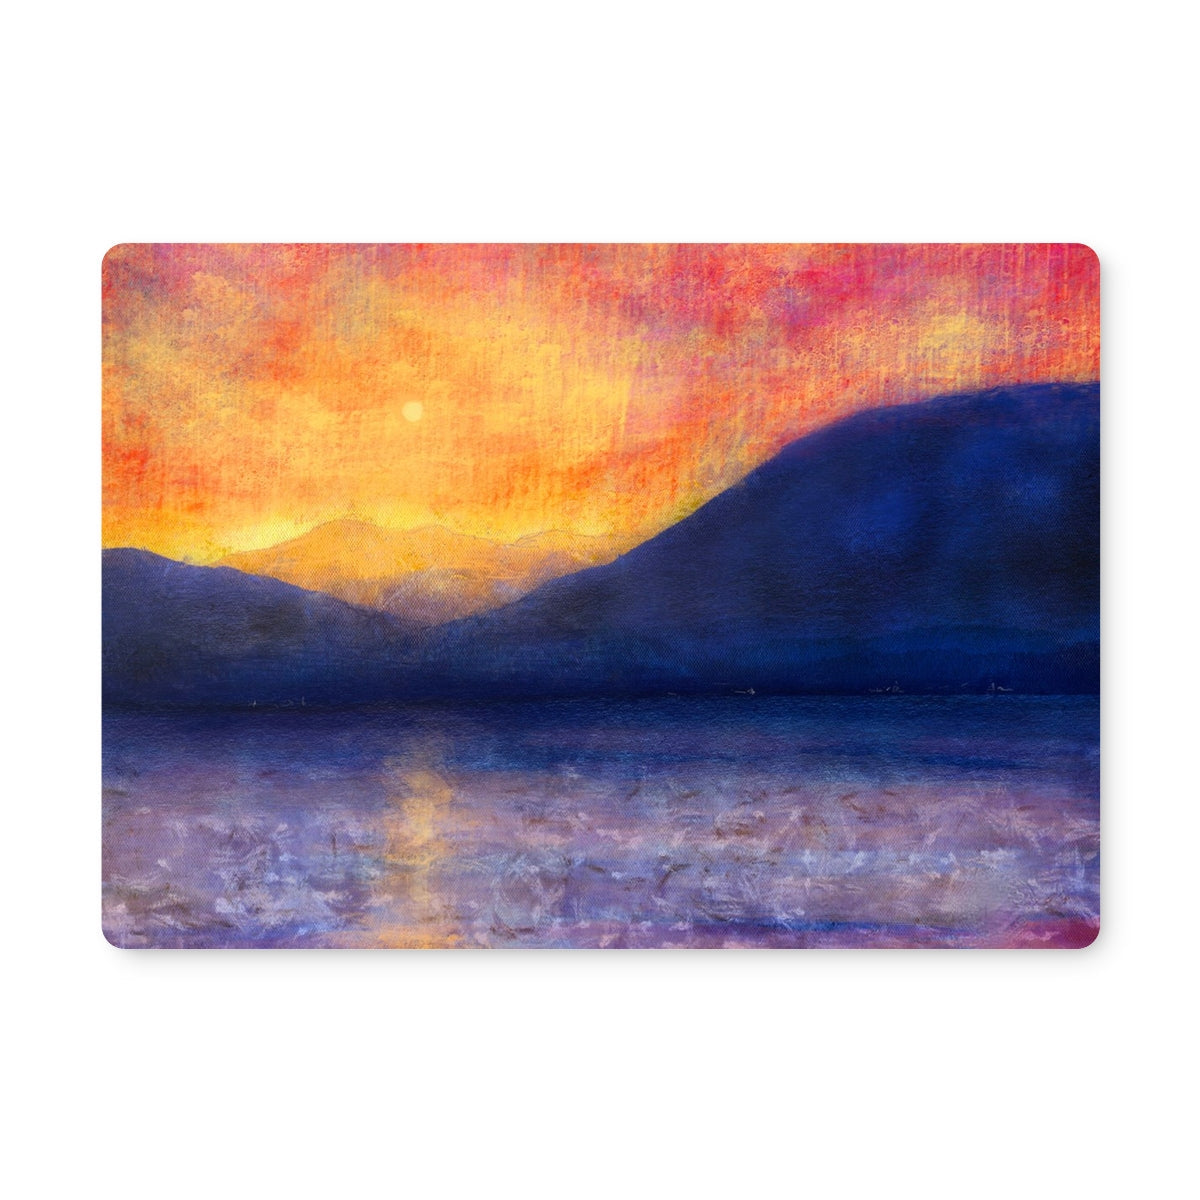 Sunset Approaching Mull Art Gifts Placemat-Placemats-Hebridean Islands Art Gallery-4 Placemats-Paintings, Prints, Homeware, Art Gifts From Scotland By Scottish Artist Kevin Hunter